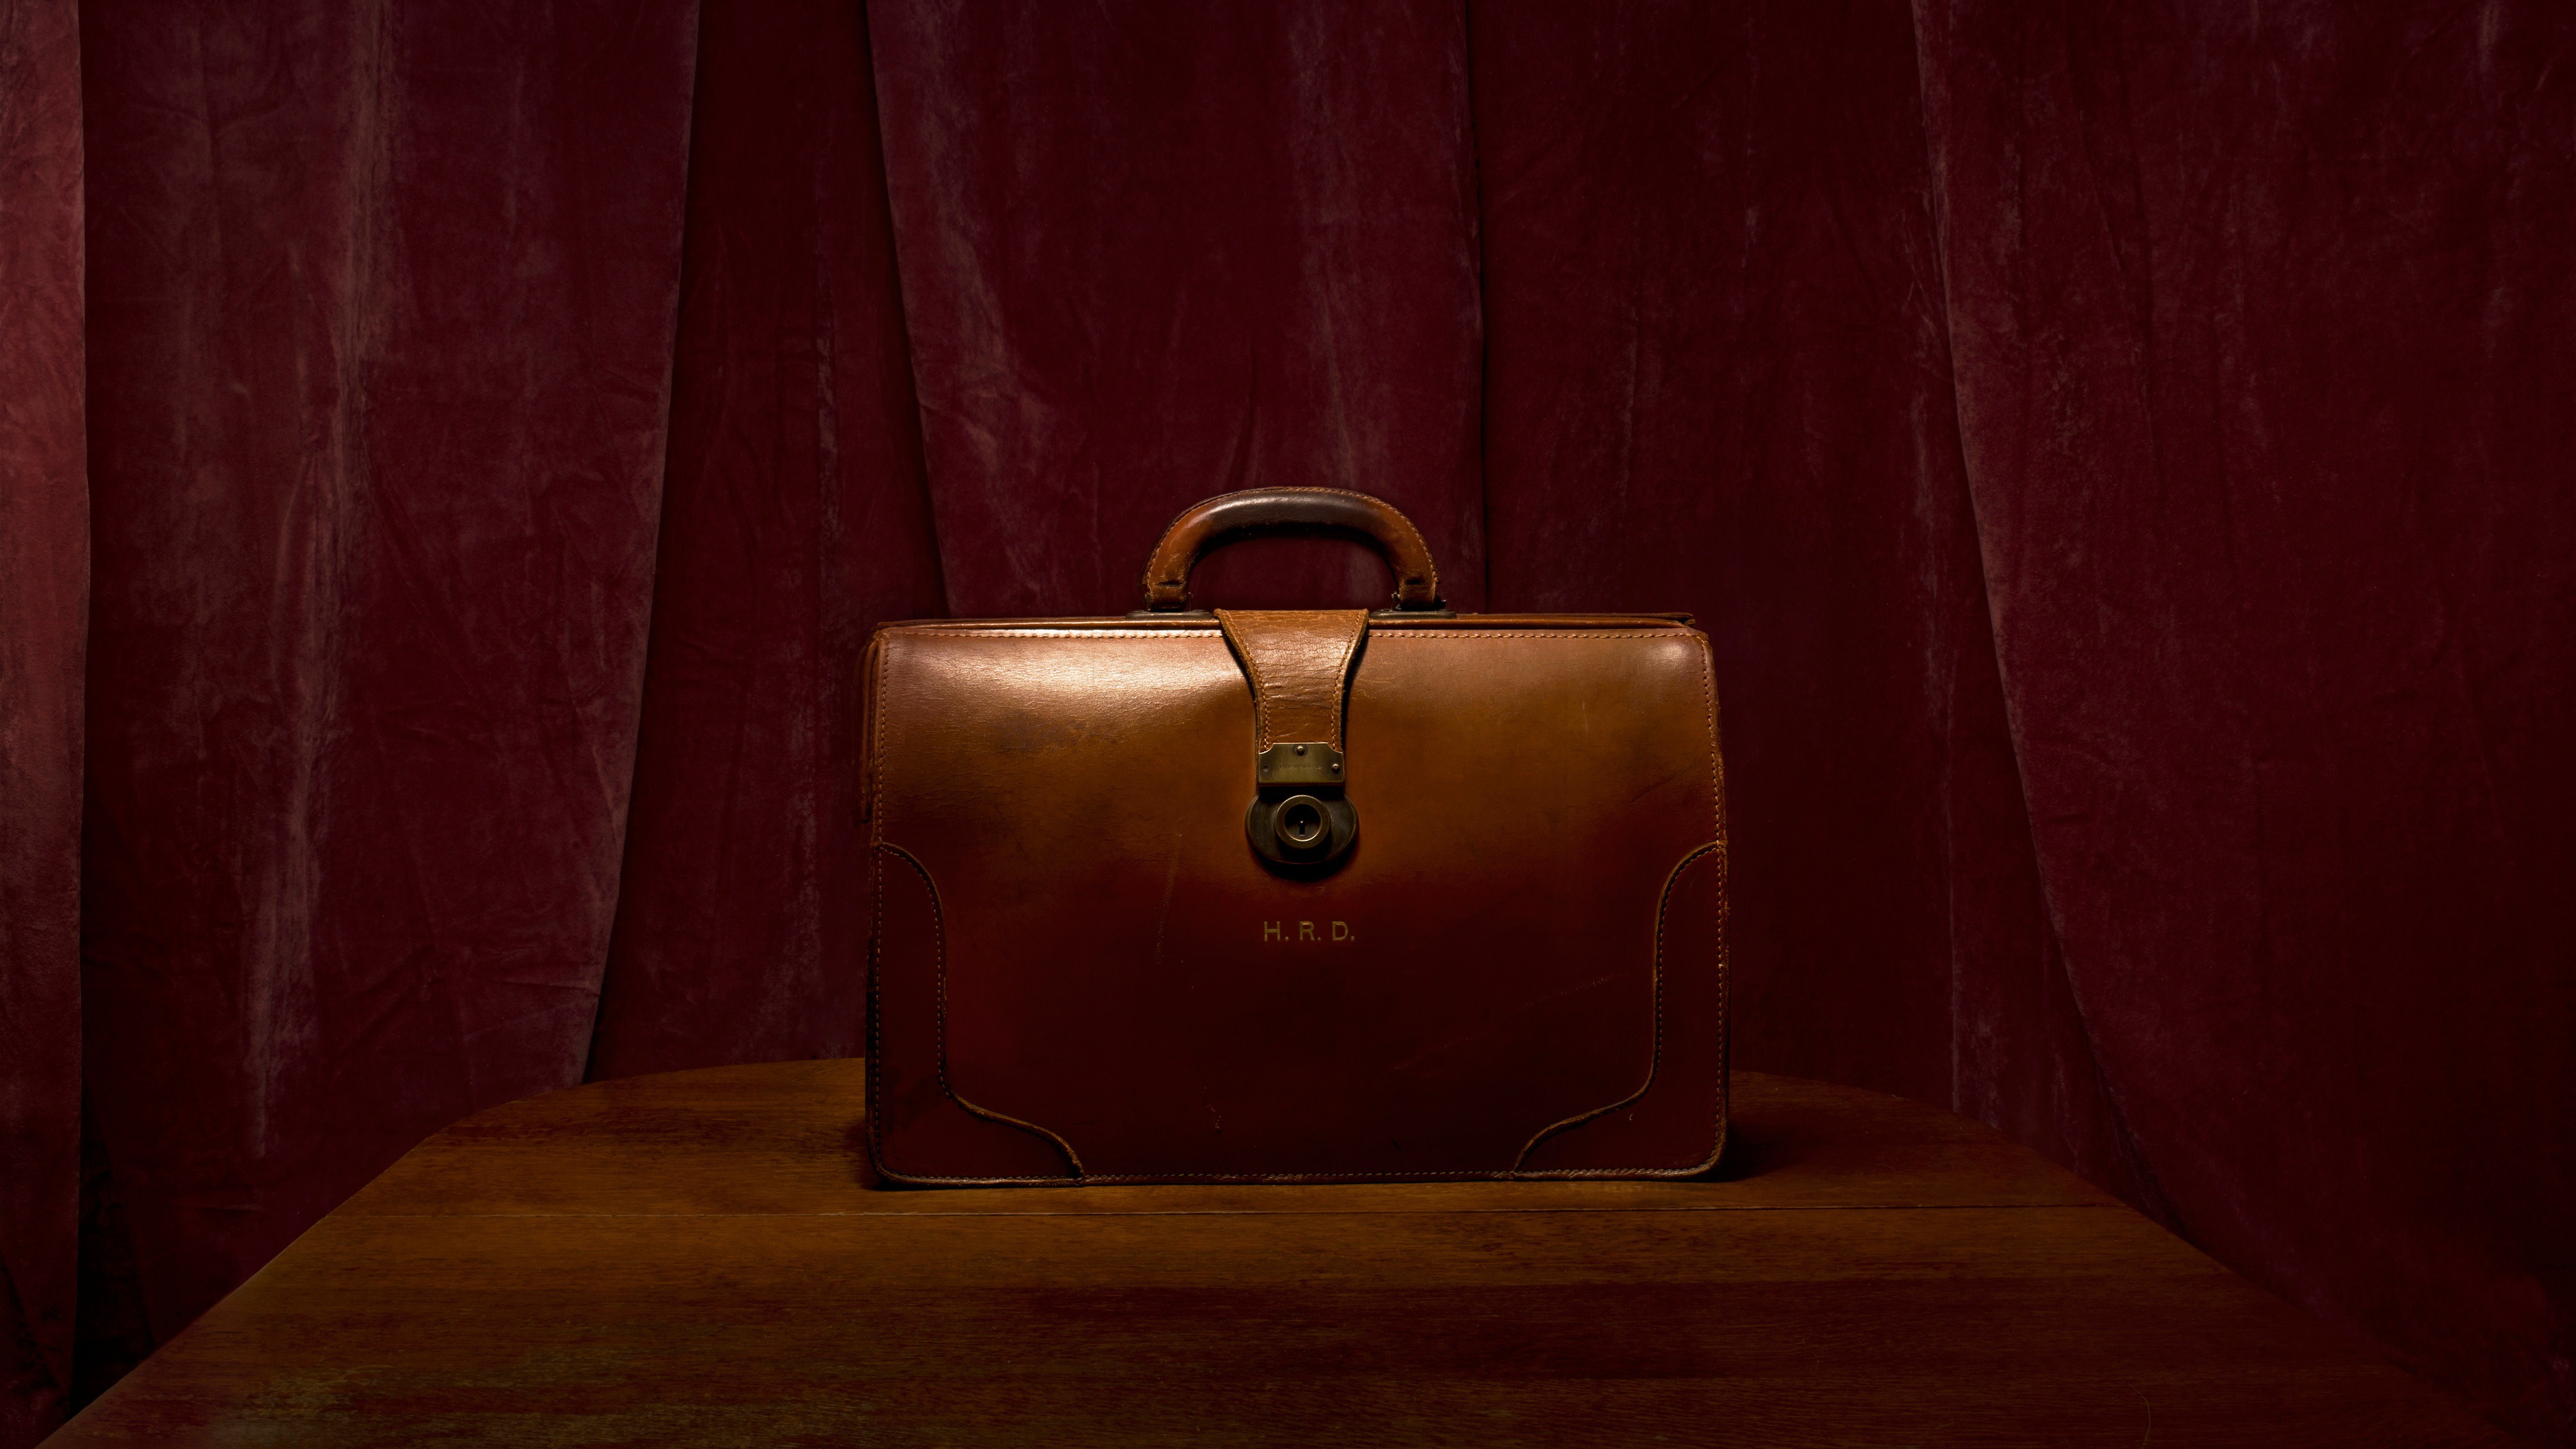 A brown, leather bag with the initials H.R. D.